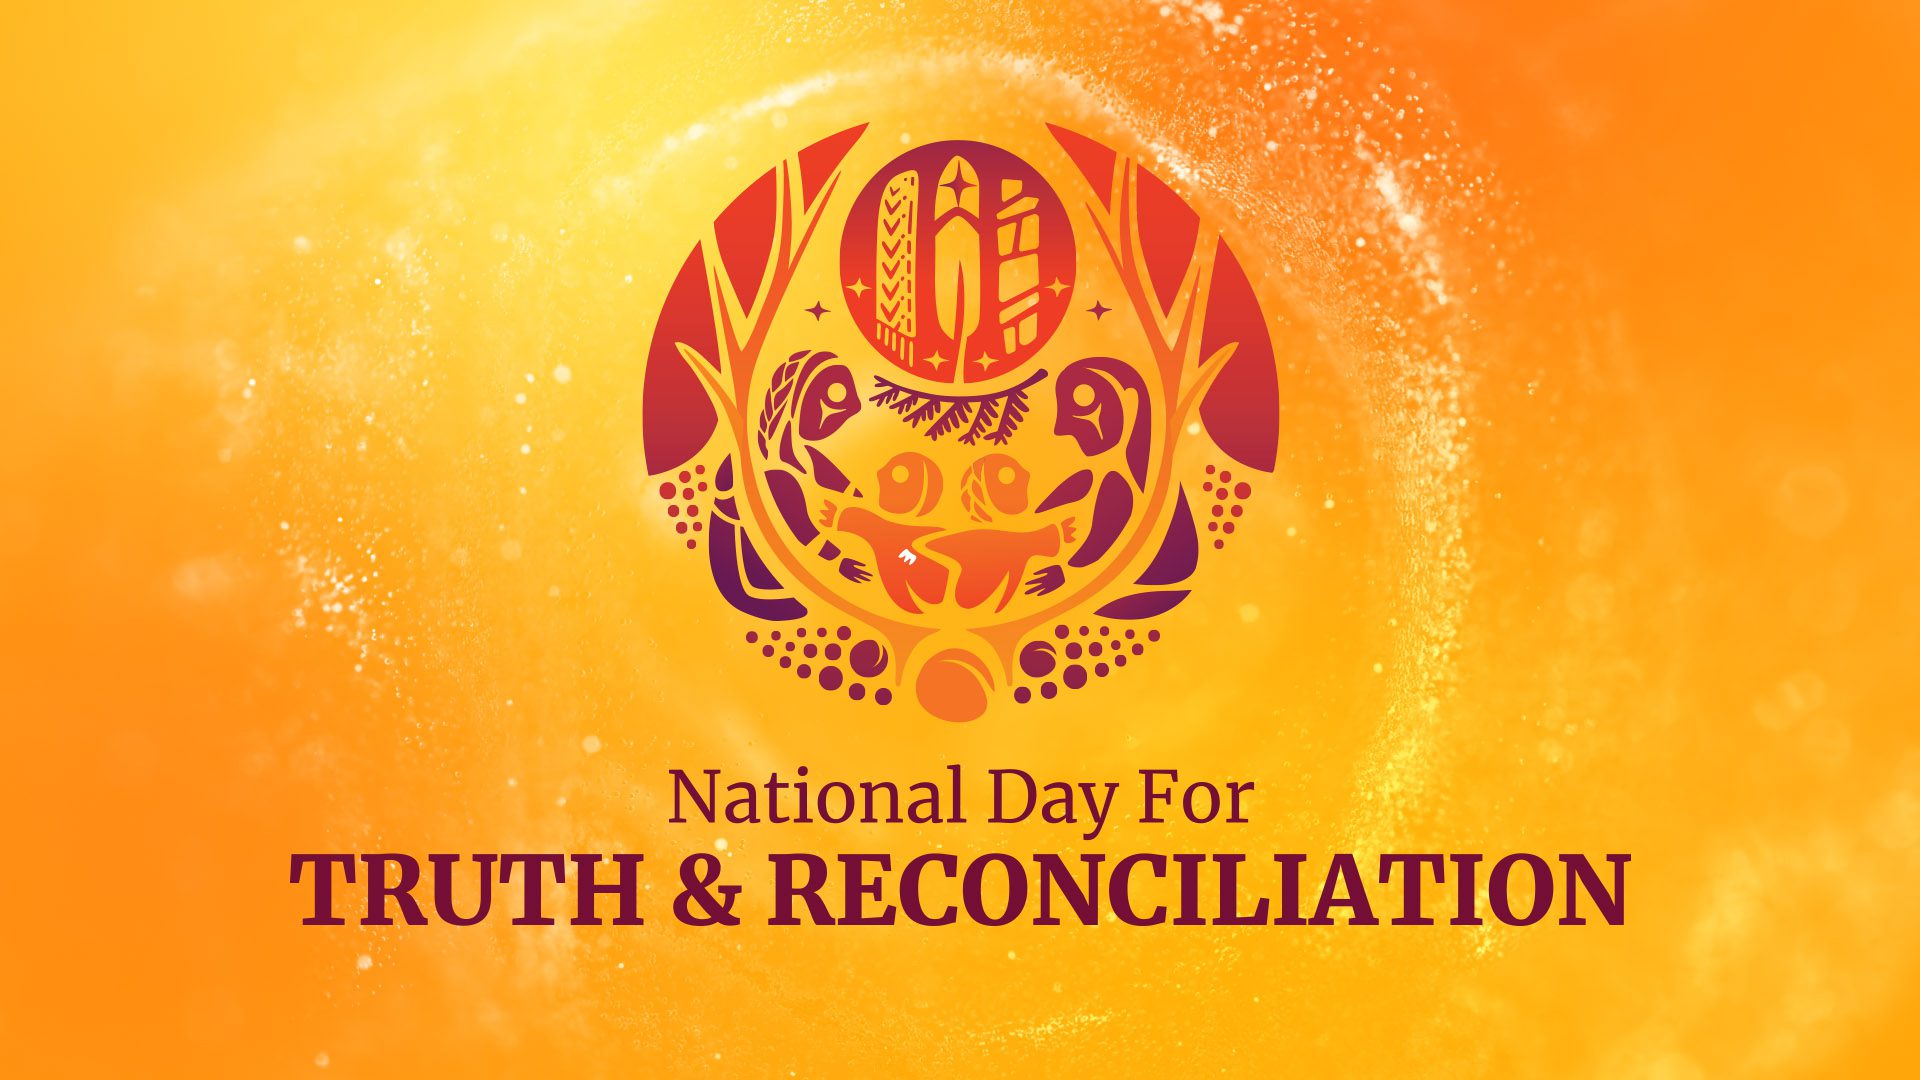 Nation Day for Truth & Reconciliation